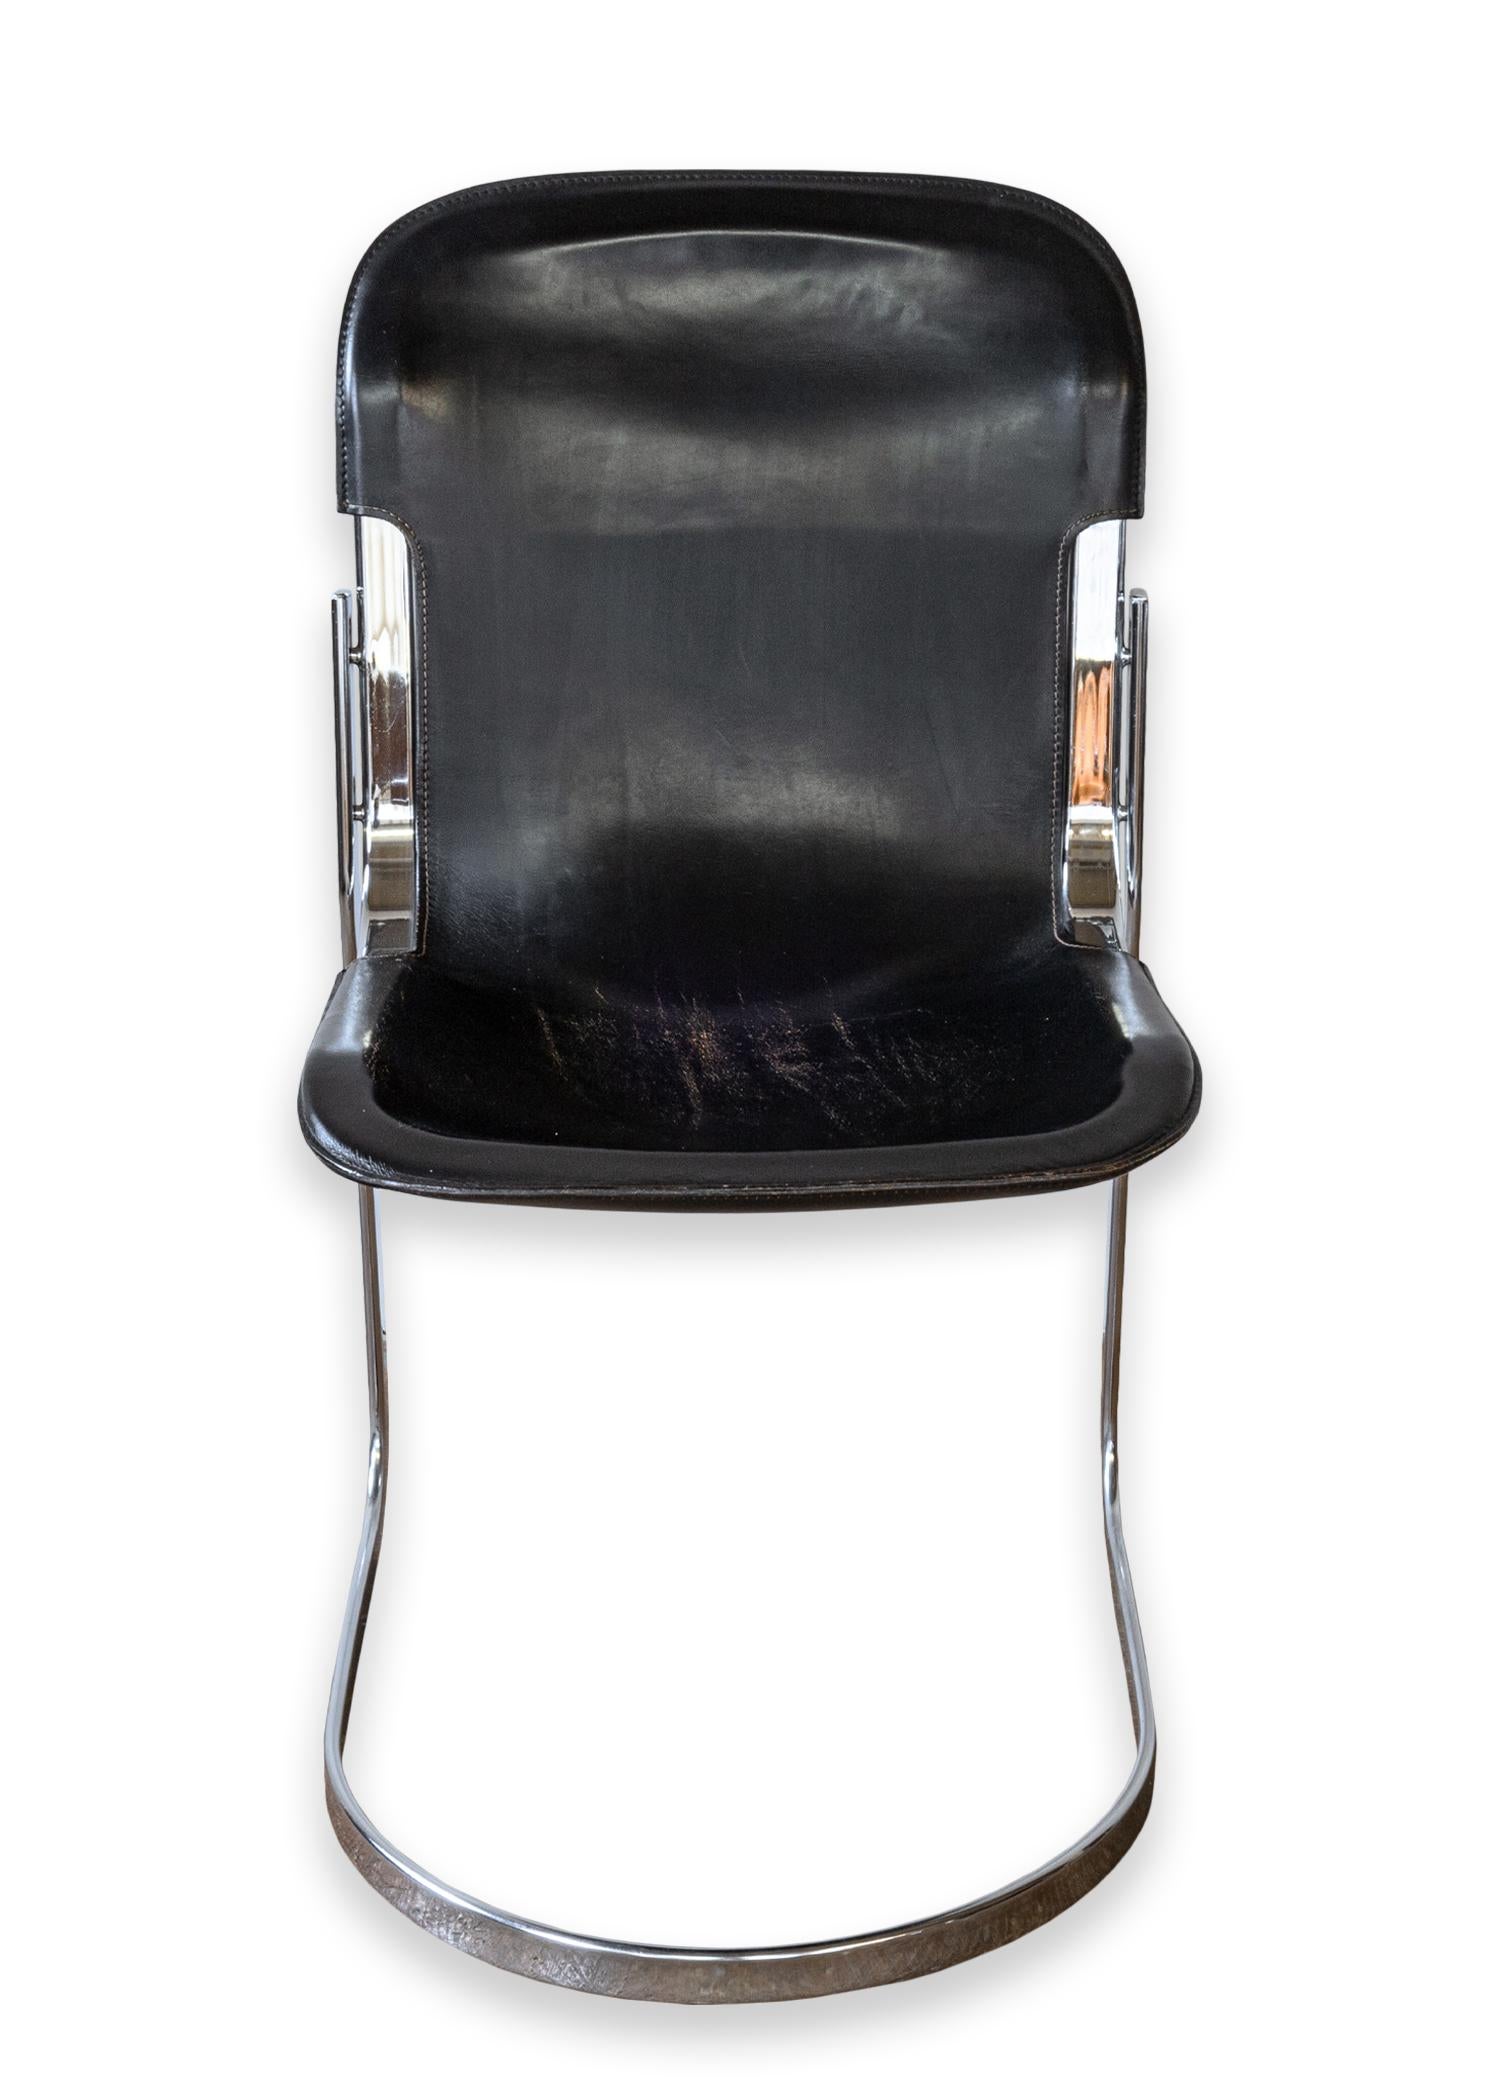 A set of 4 dining or accent chairs designed by Willy Rizzo for Cidue. A stunning set of vintage Italian designed cantilever chairs, iconic and minimal. These chairs feature a chrome cantilever frame, and a rich black leather seat. These chairs are